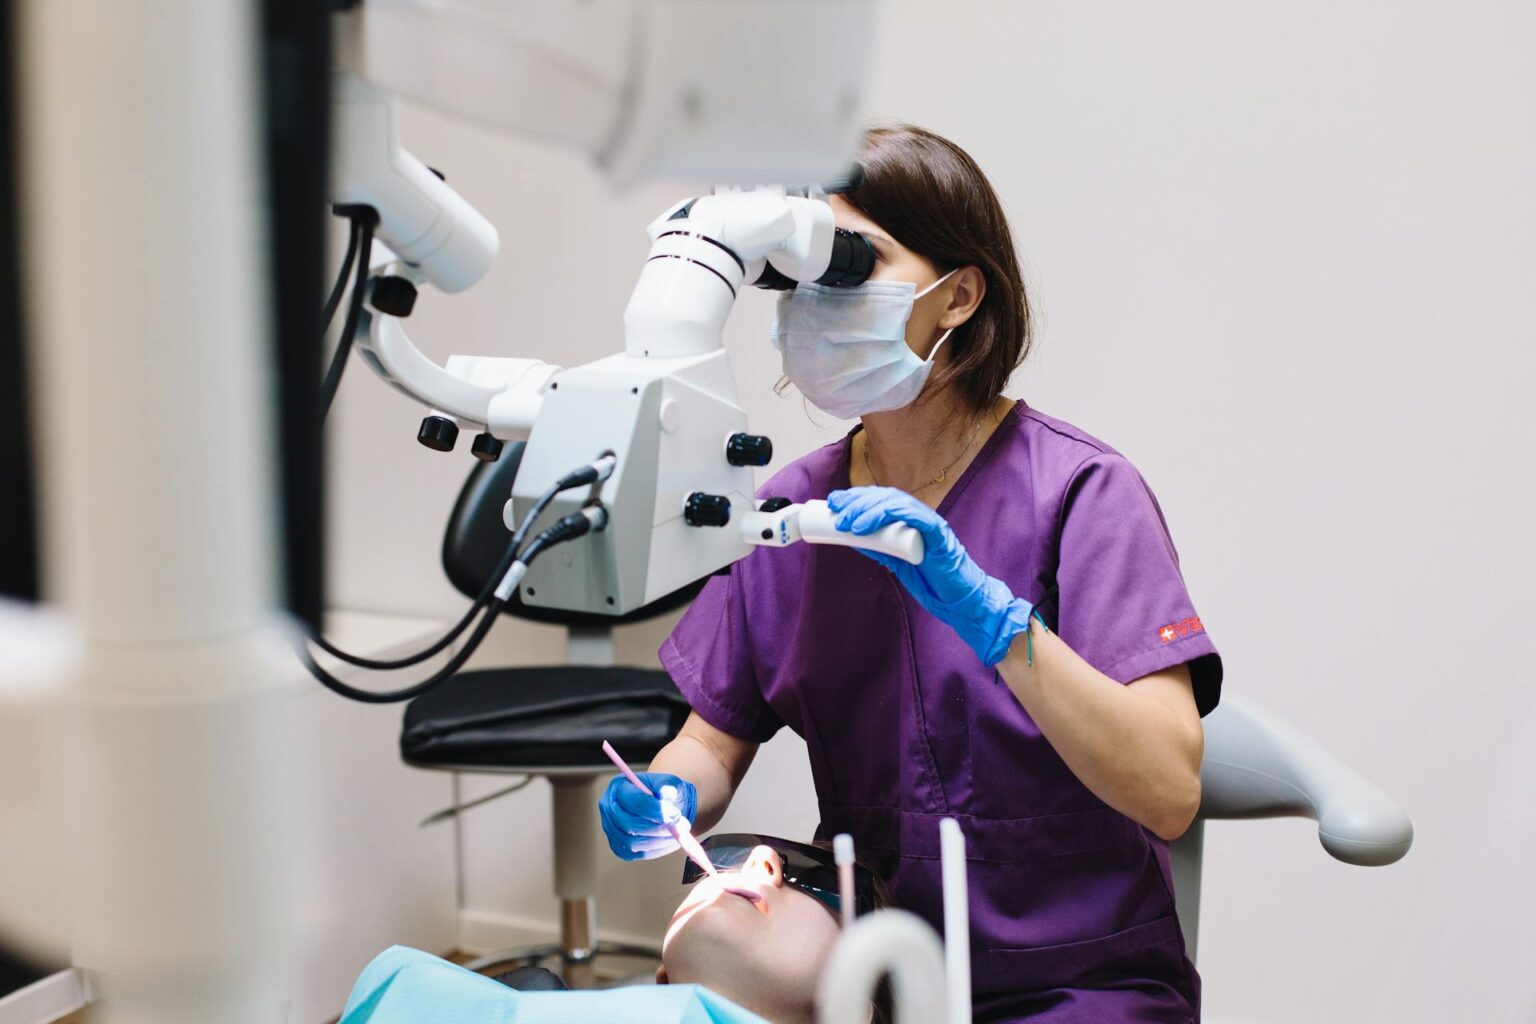 What Is the Dental Operative Microscope? What Impact Has It Had on Dentistry?